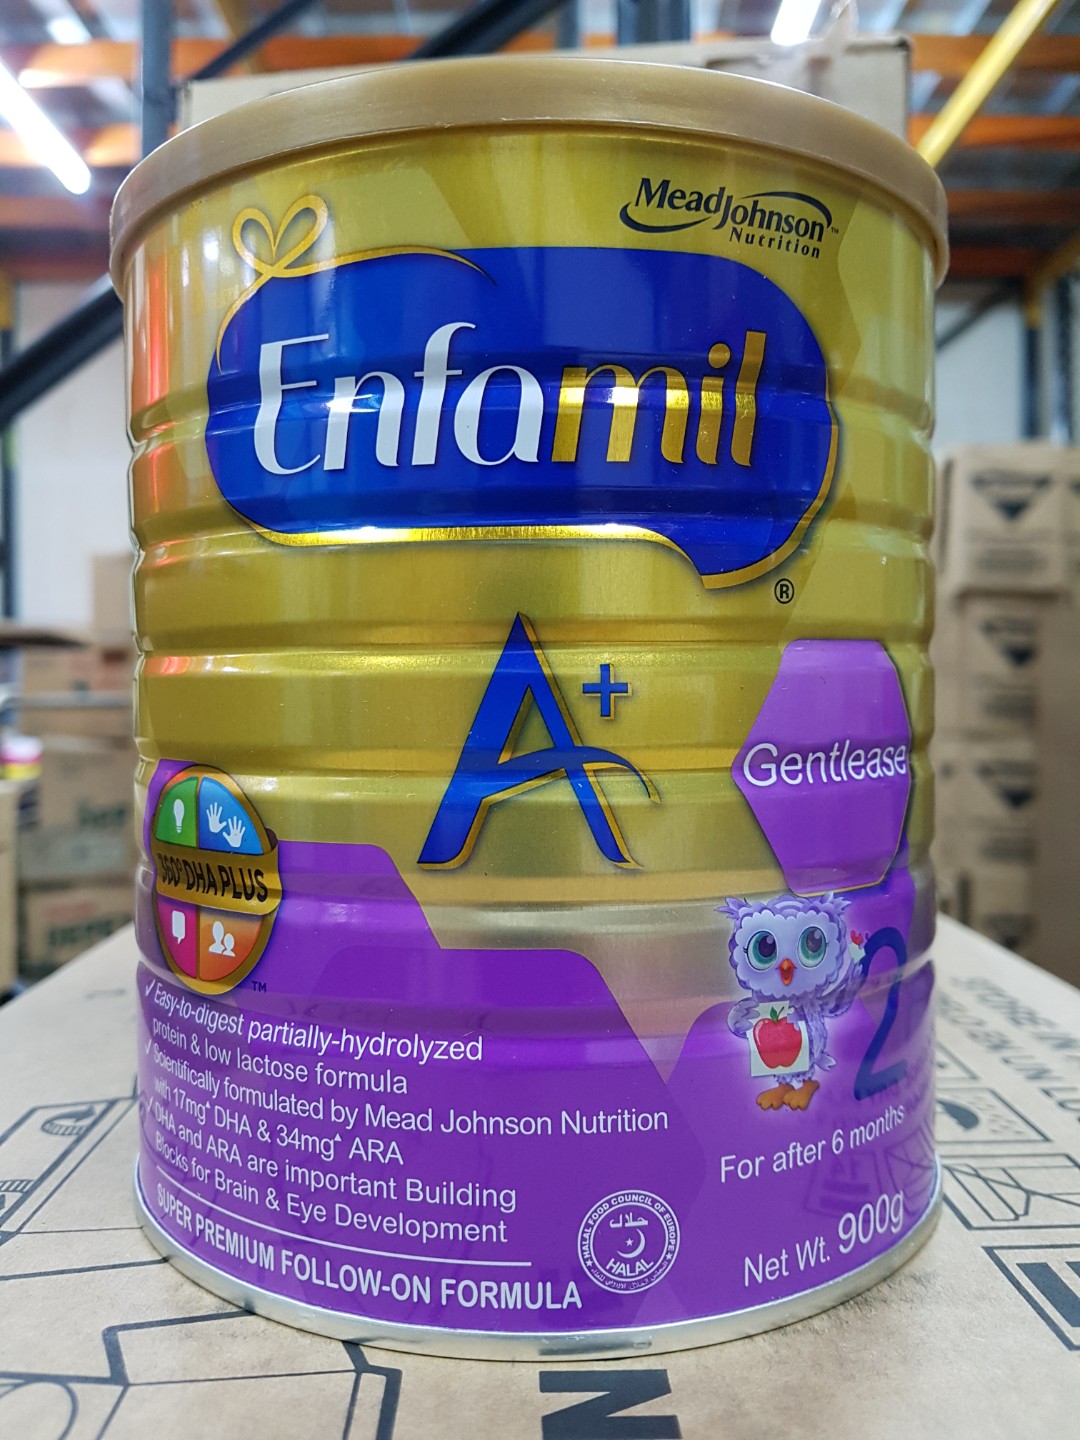 enfamil a  for 1 year old